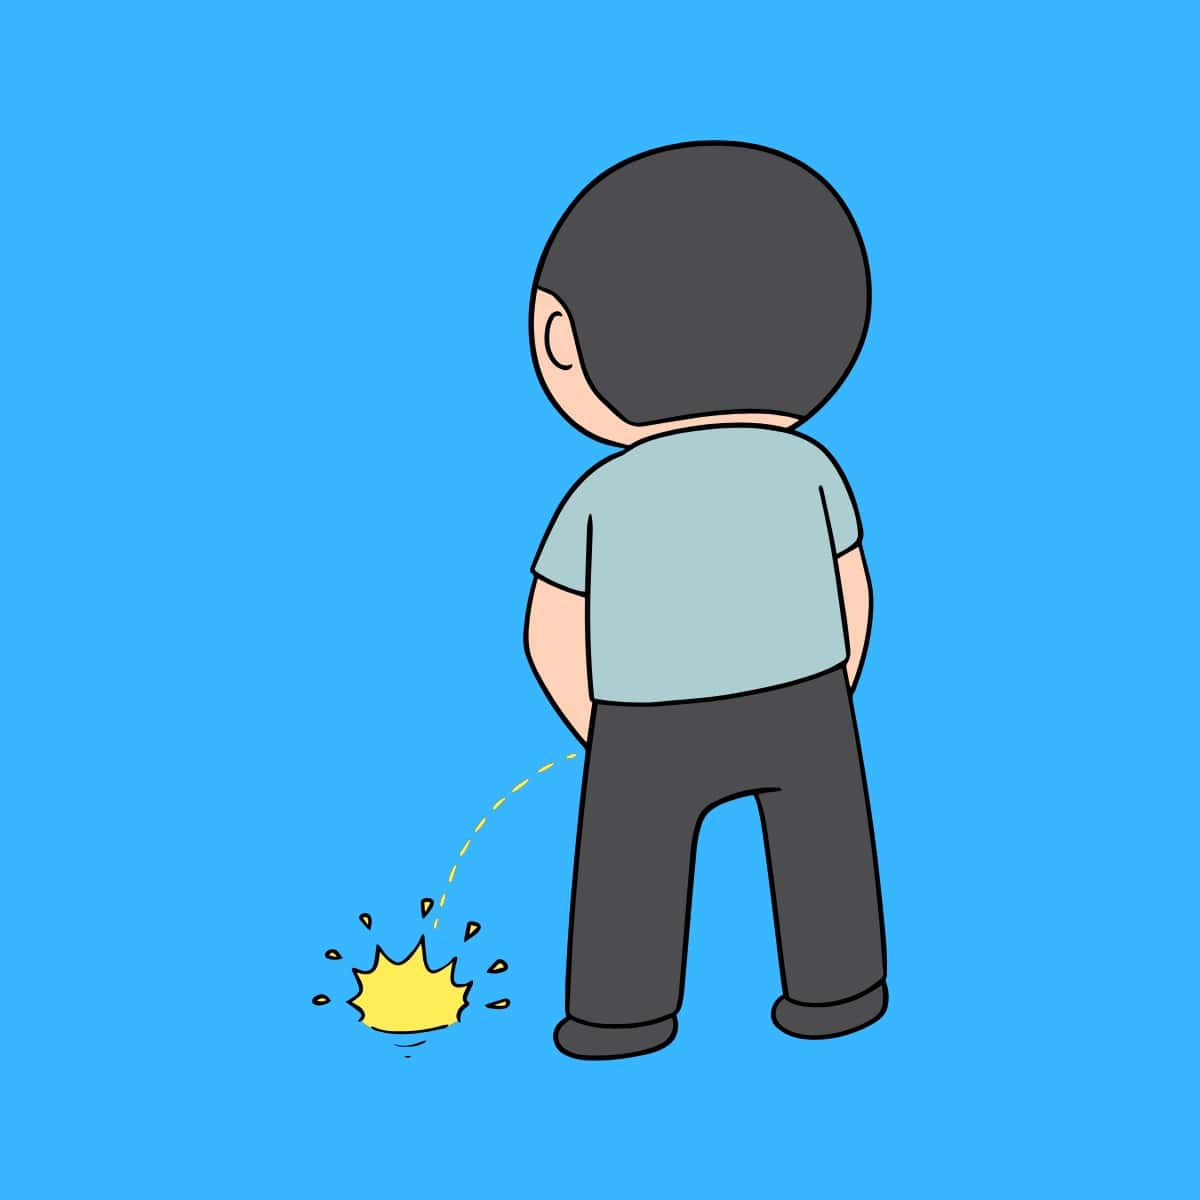 Cartoon graphic of a boy peeing onto the ground on a blue background.